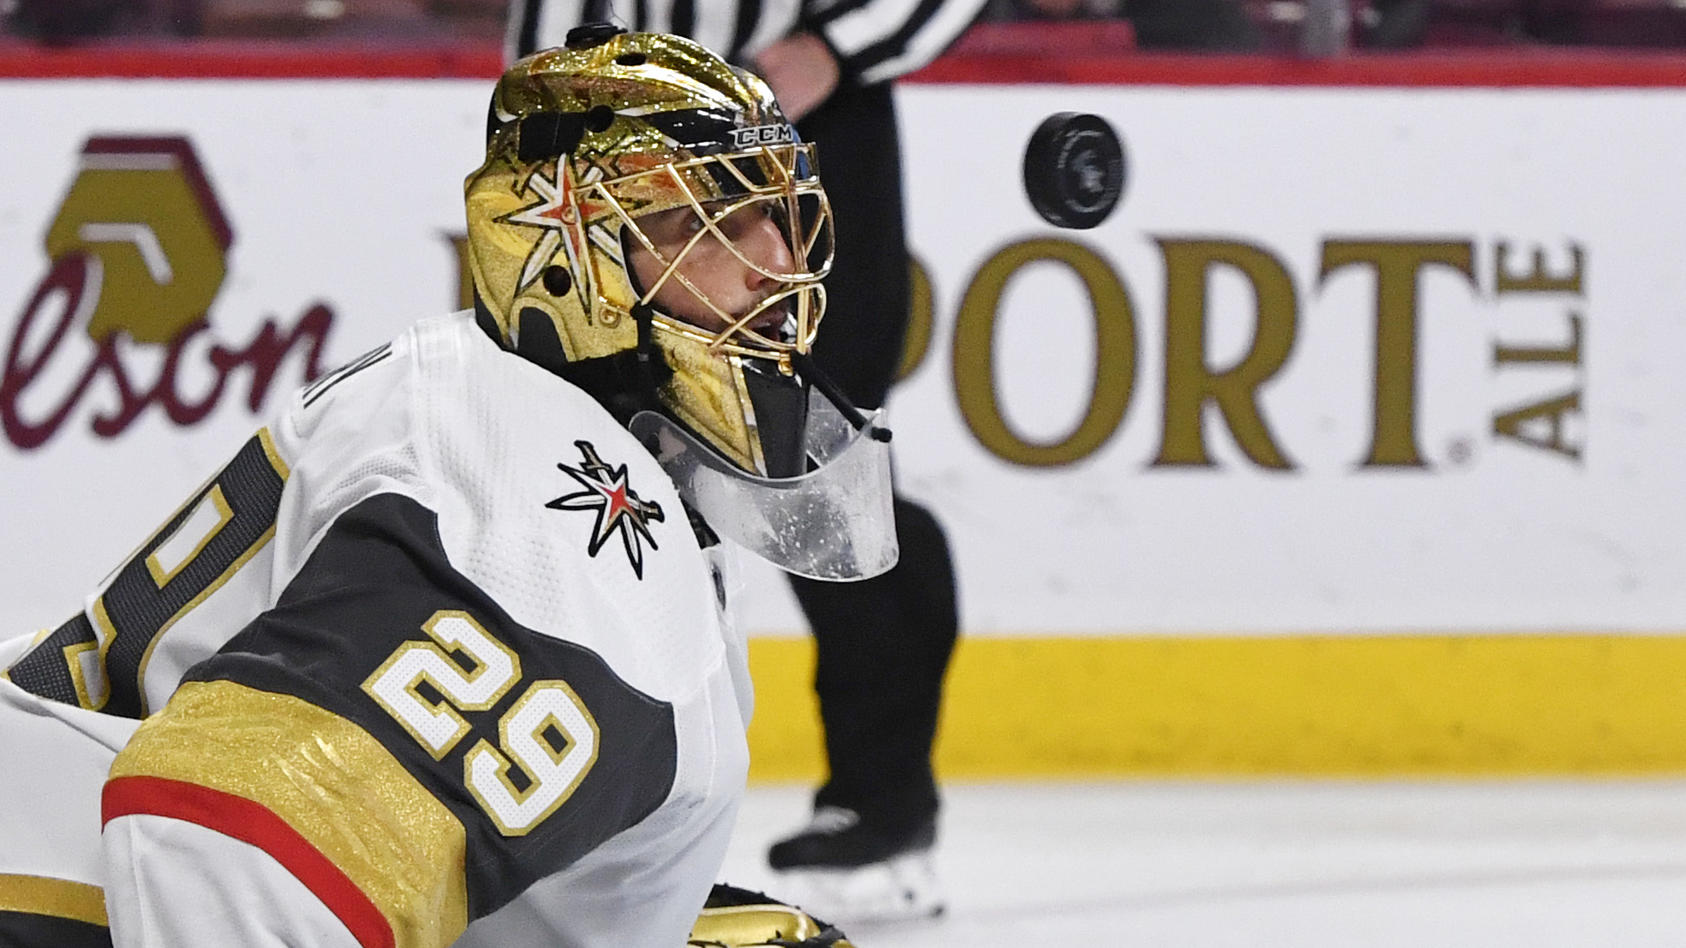 Jun 18, 2021; Montreal, Quebec, CAN; Vegas Golden Knights goalie Marc-Andre Fleury (29) tracks the puck during the second period in game three of the 2021 Stanley Cup Semifinals against the Montreal Canadiens at the Bell Centre. Mandatory Credit: Eri